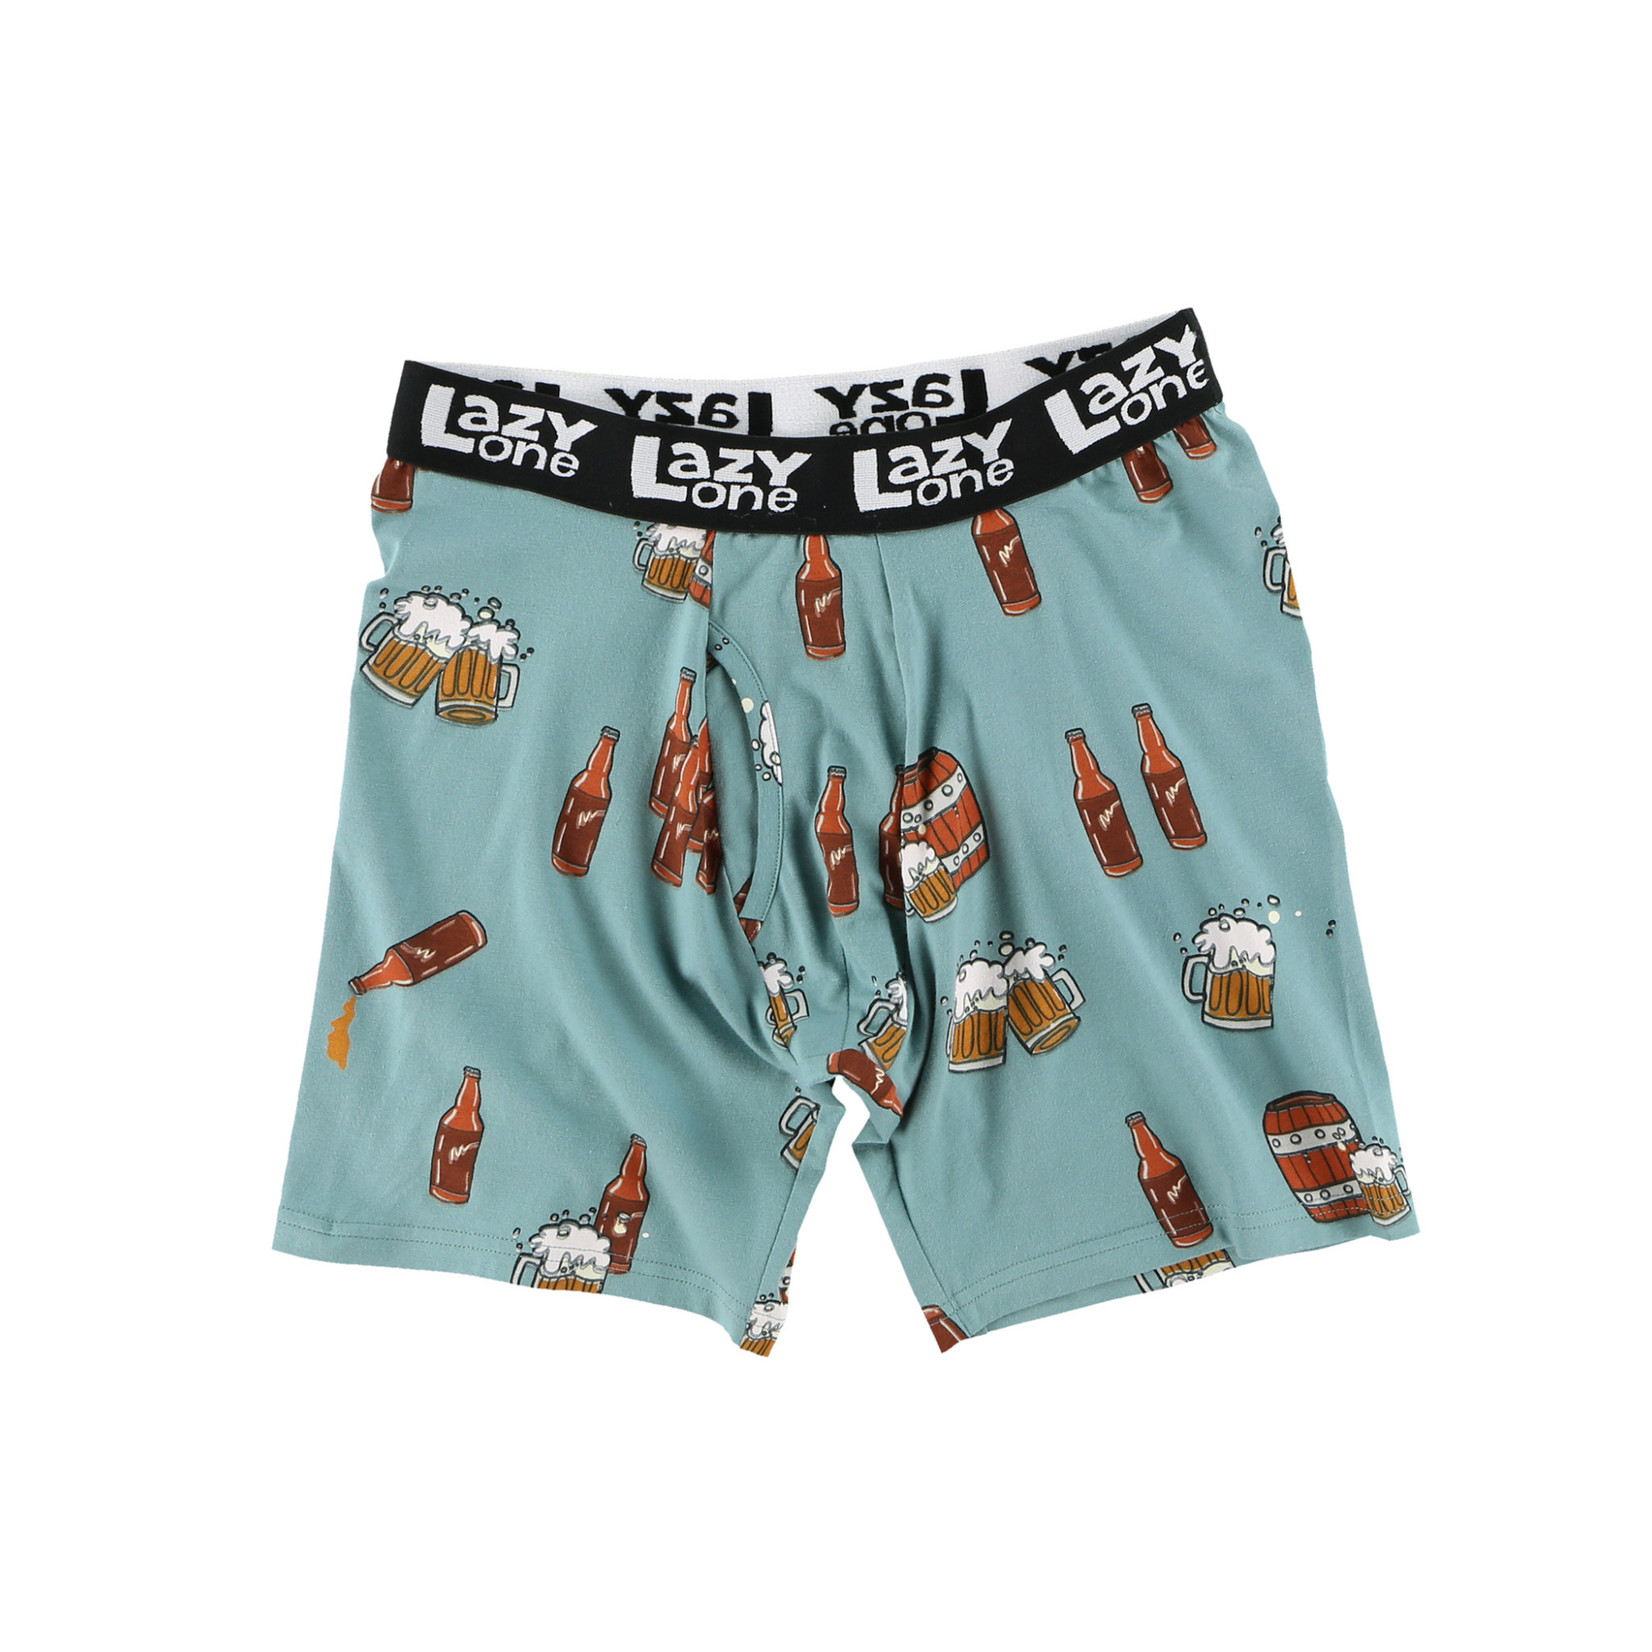 Lazy One Beeriere Boxer Brief